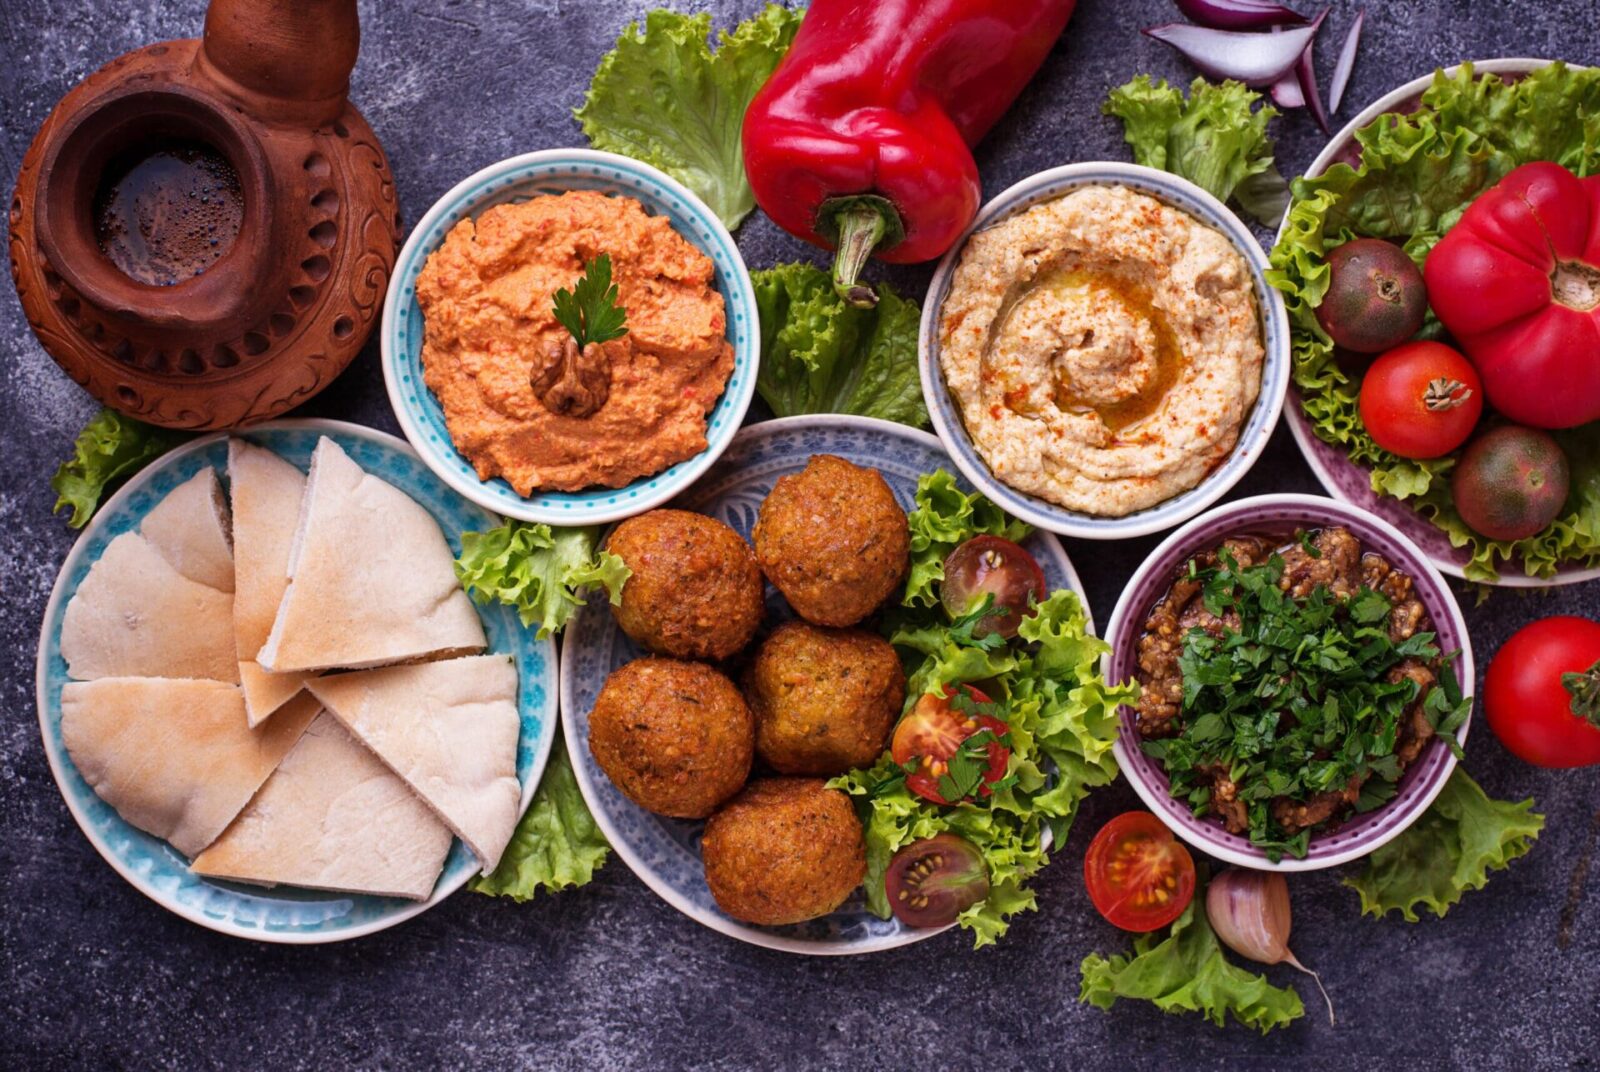 Selection of Middle eastern or Arabic dishes. Falafel, hummus, pita and muhammara. Top view